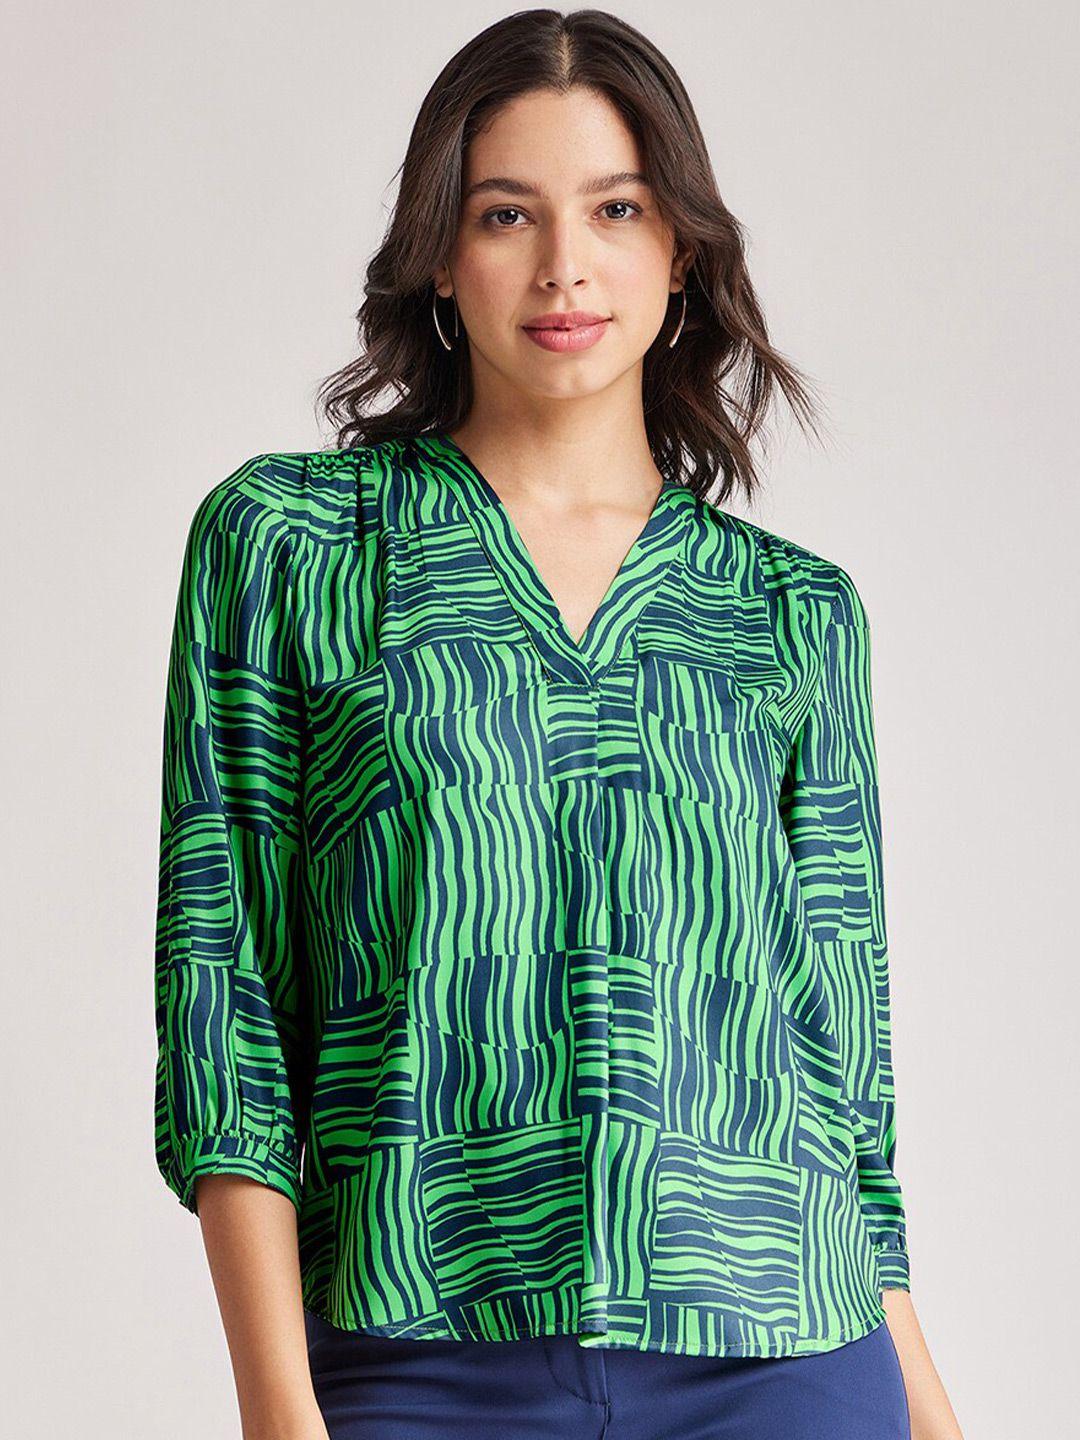 fablestreet abstract printed v-neck cuffed sleeves shirt style top